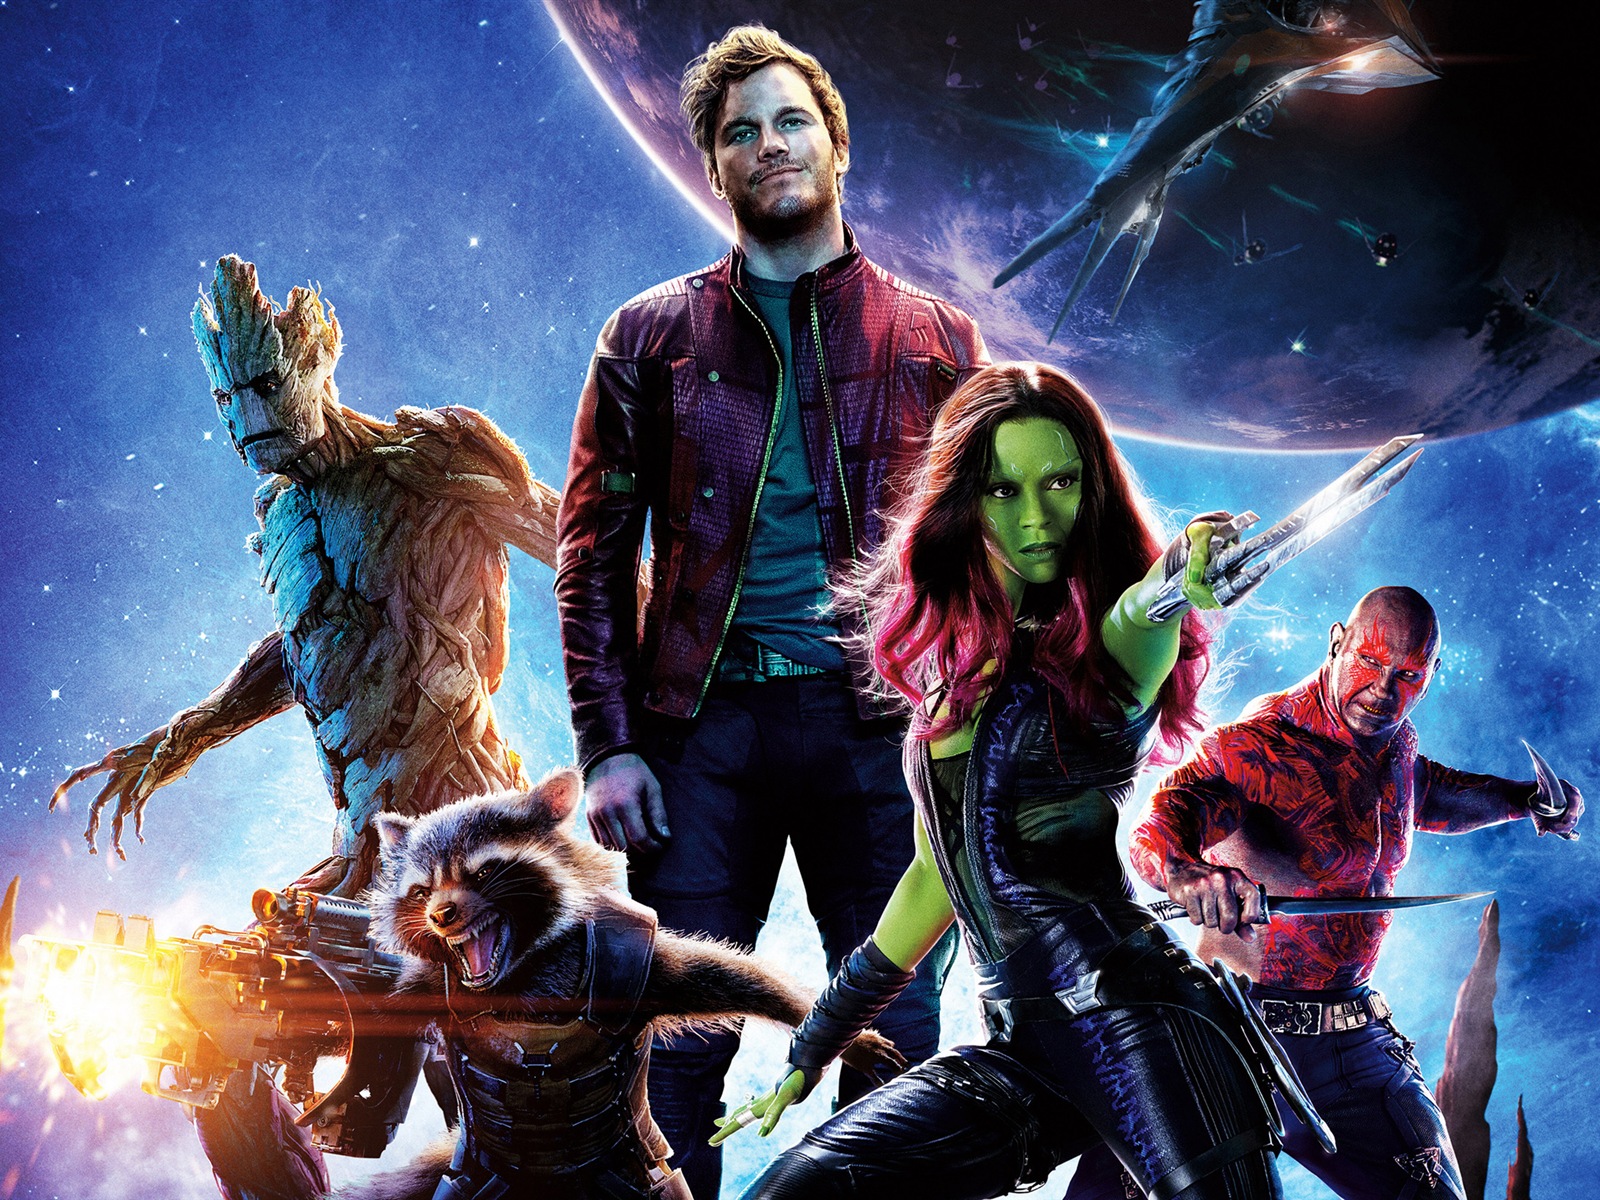 Guardians of the Galaxy 2014 HD movie wallpapers #1 - 1600x1200